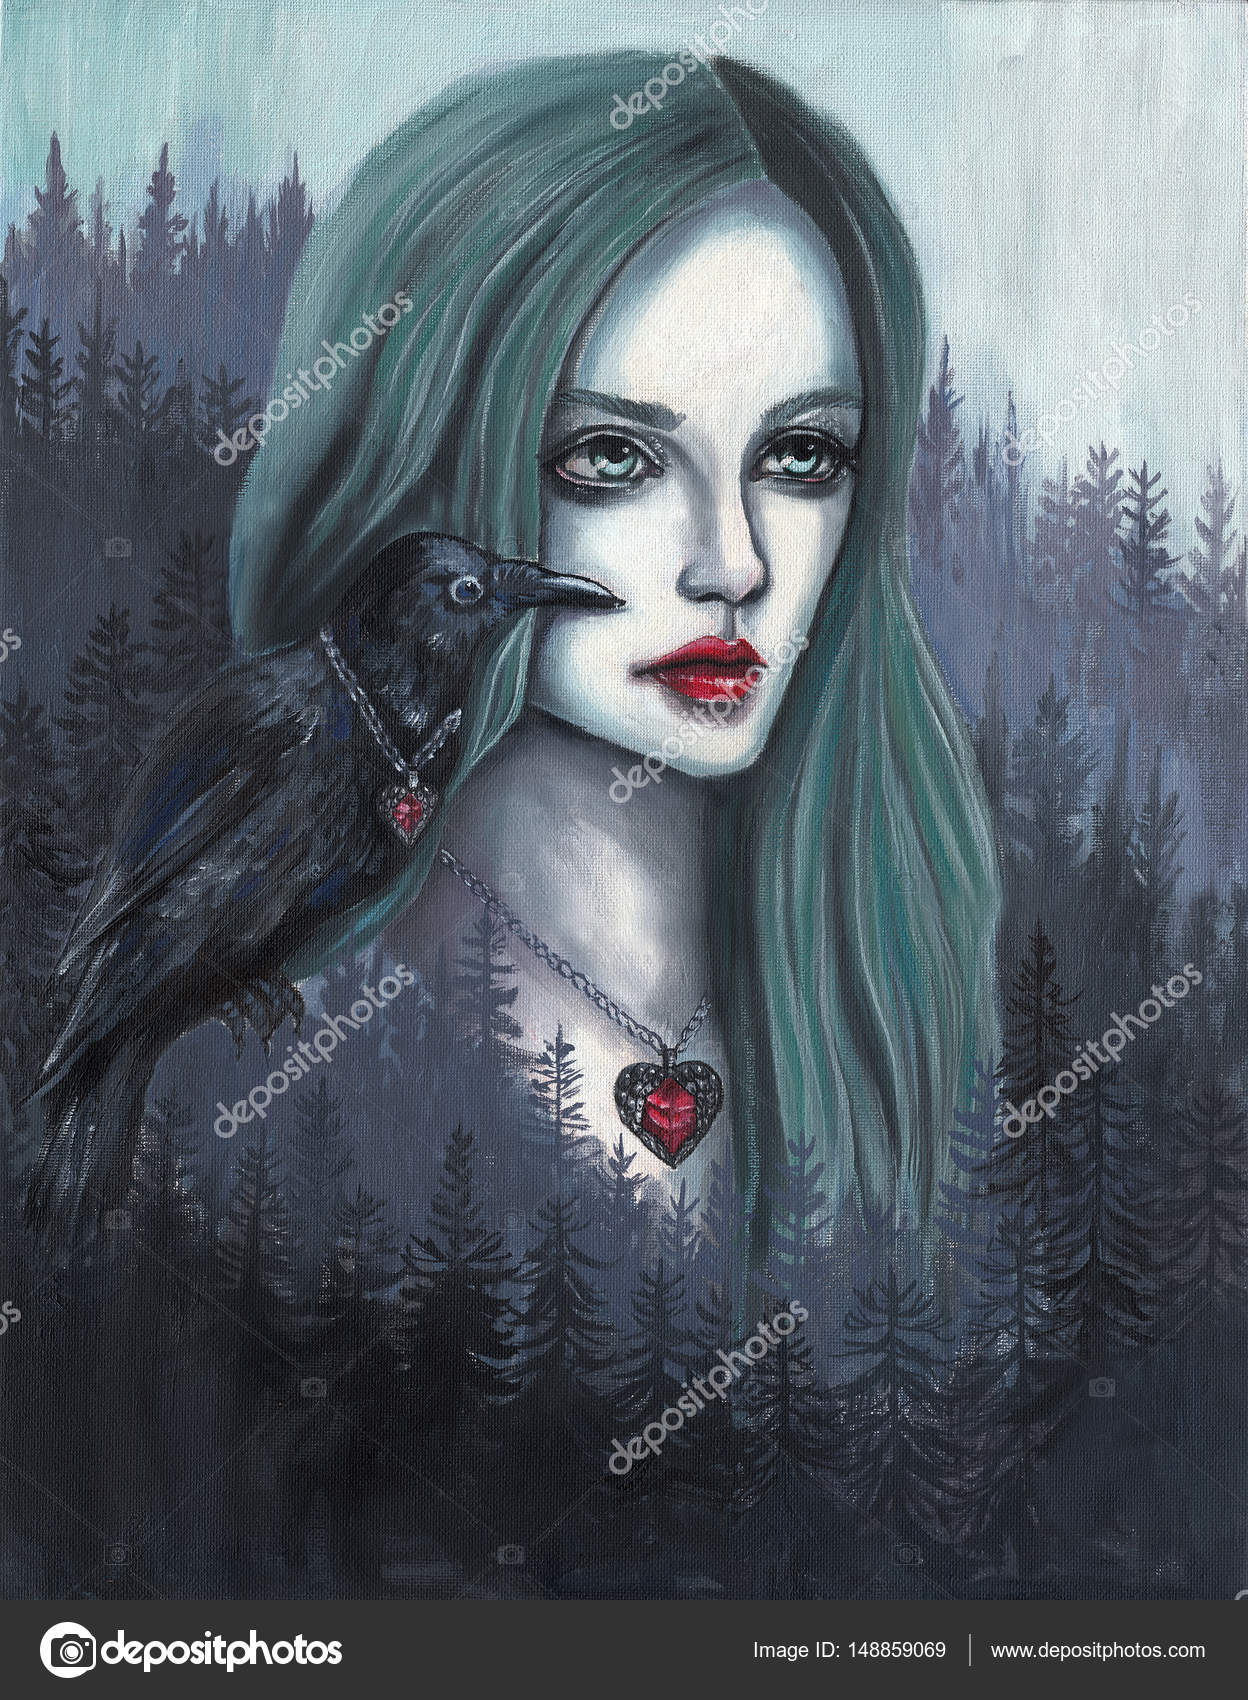 Beautiful Girl With A Crow On Her Shoulder A Bird Girl Girl In The Forest Gothic Illustration